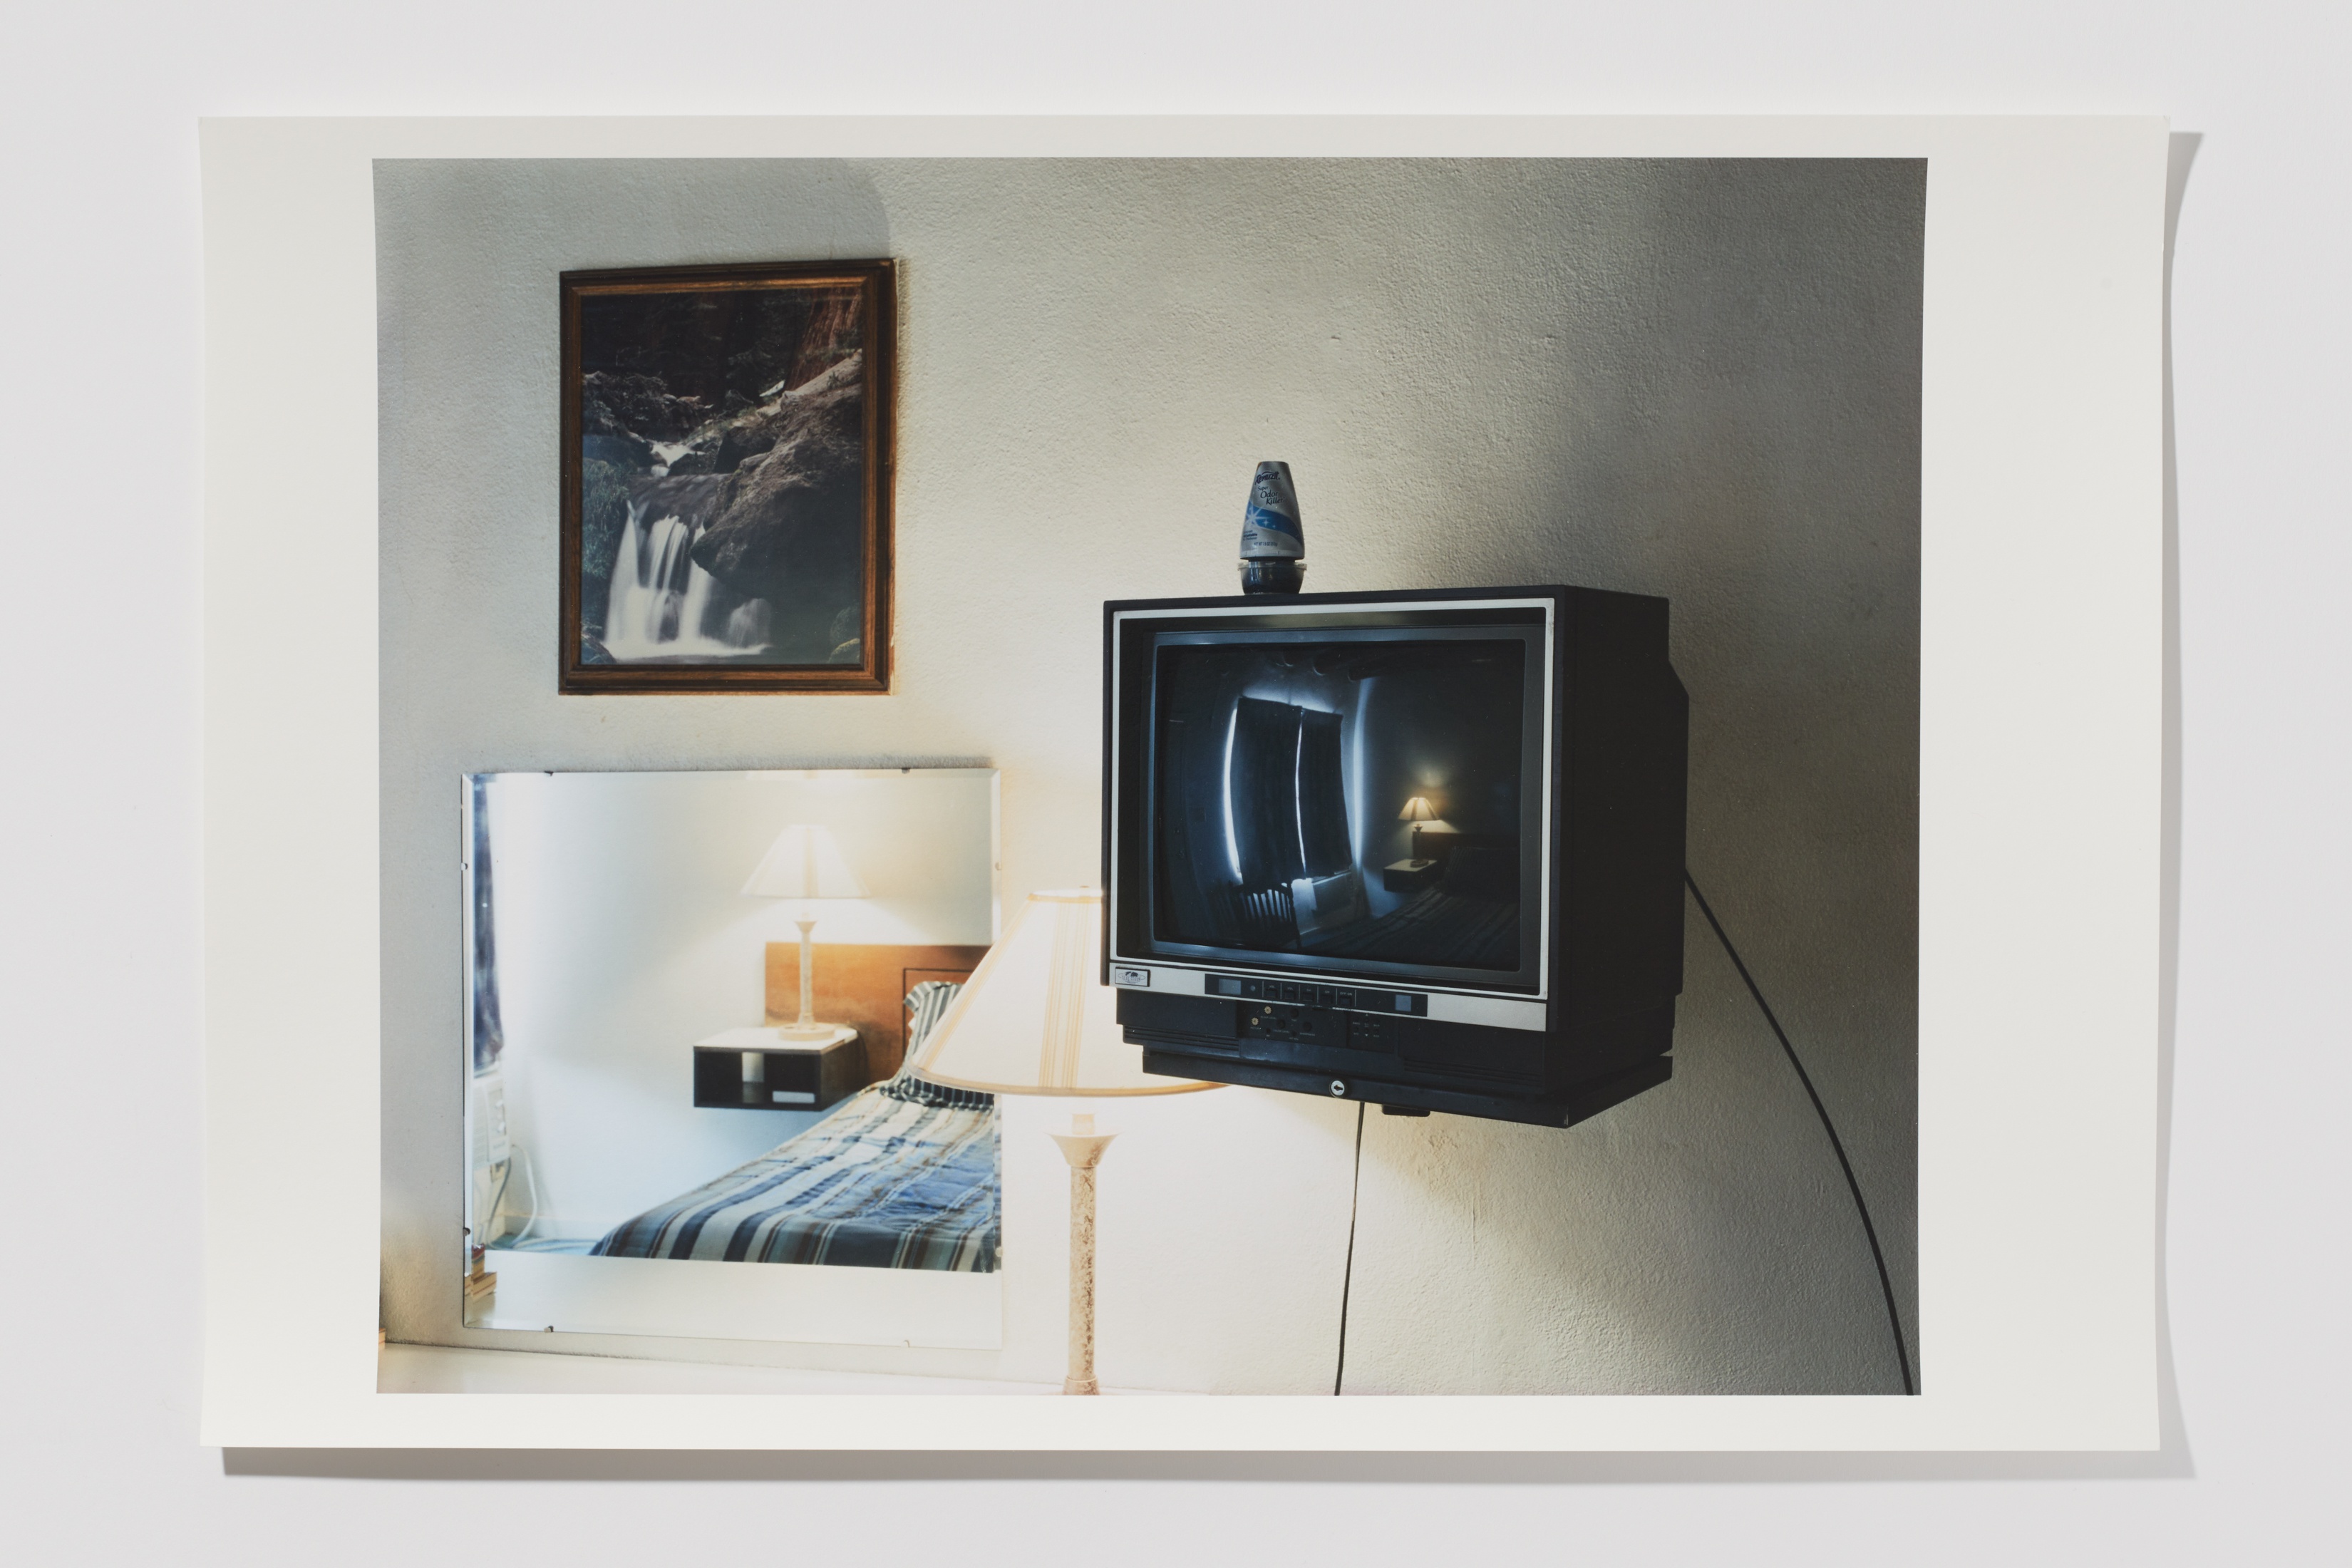 Eric Cousineau, from the American Motel series